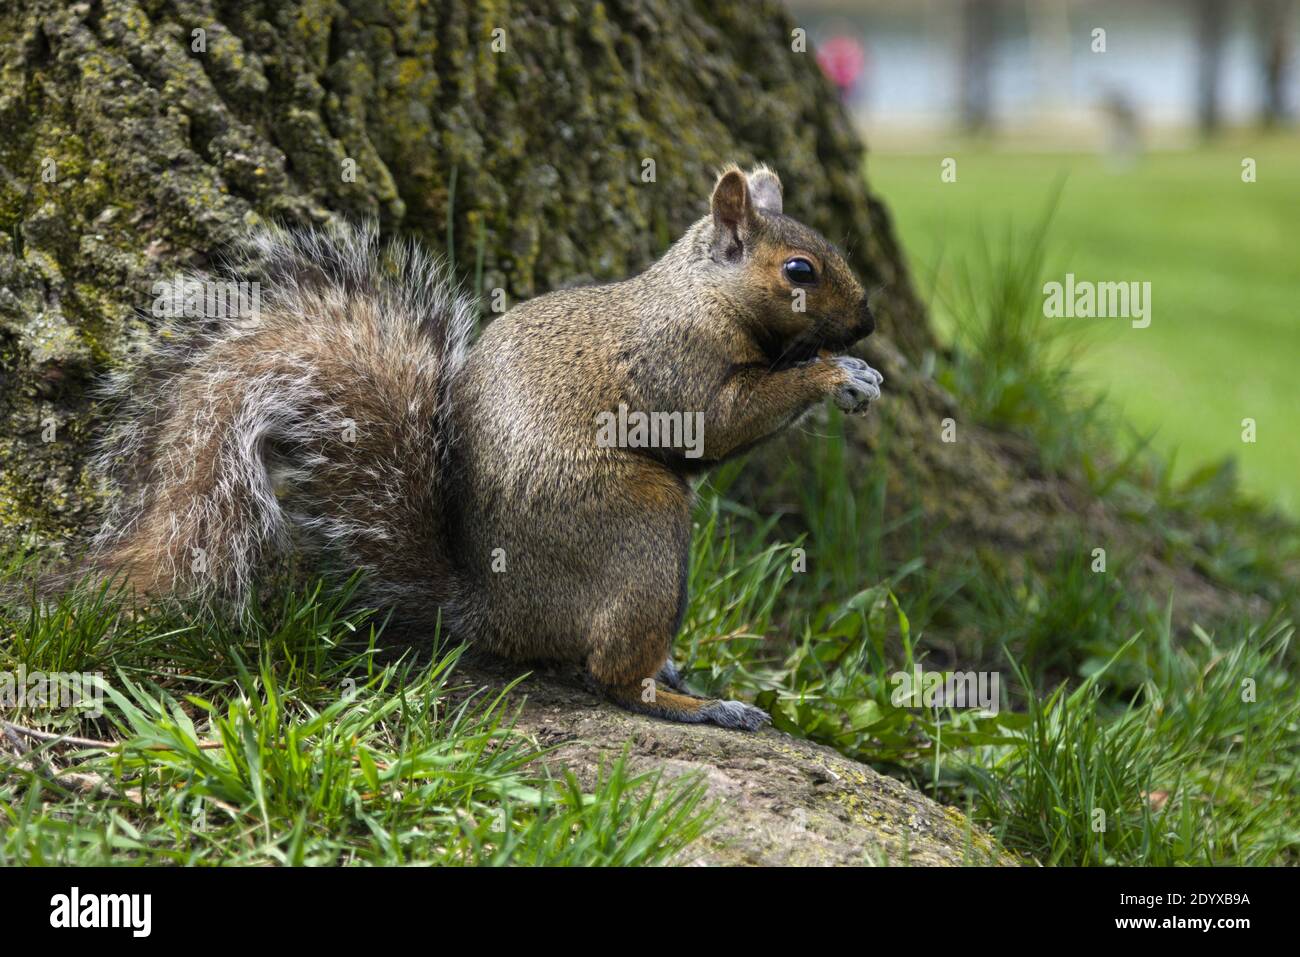 A cute little squirrel at the foot of a tree in city park, gray squirrel Stock Photo